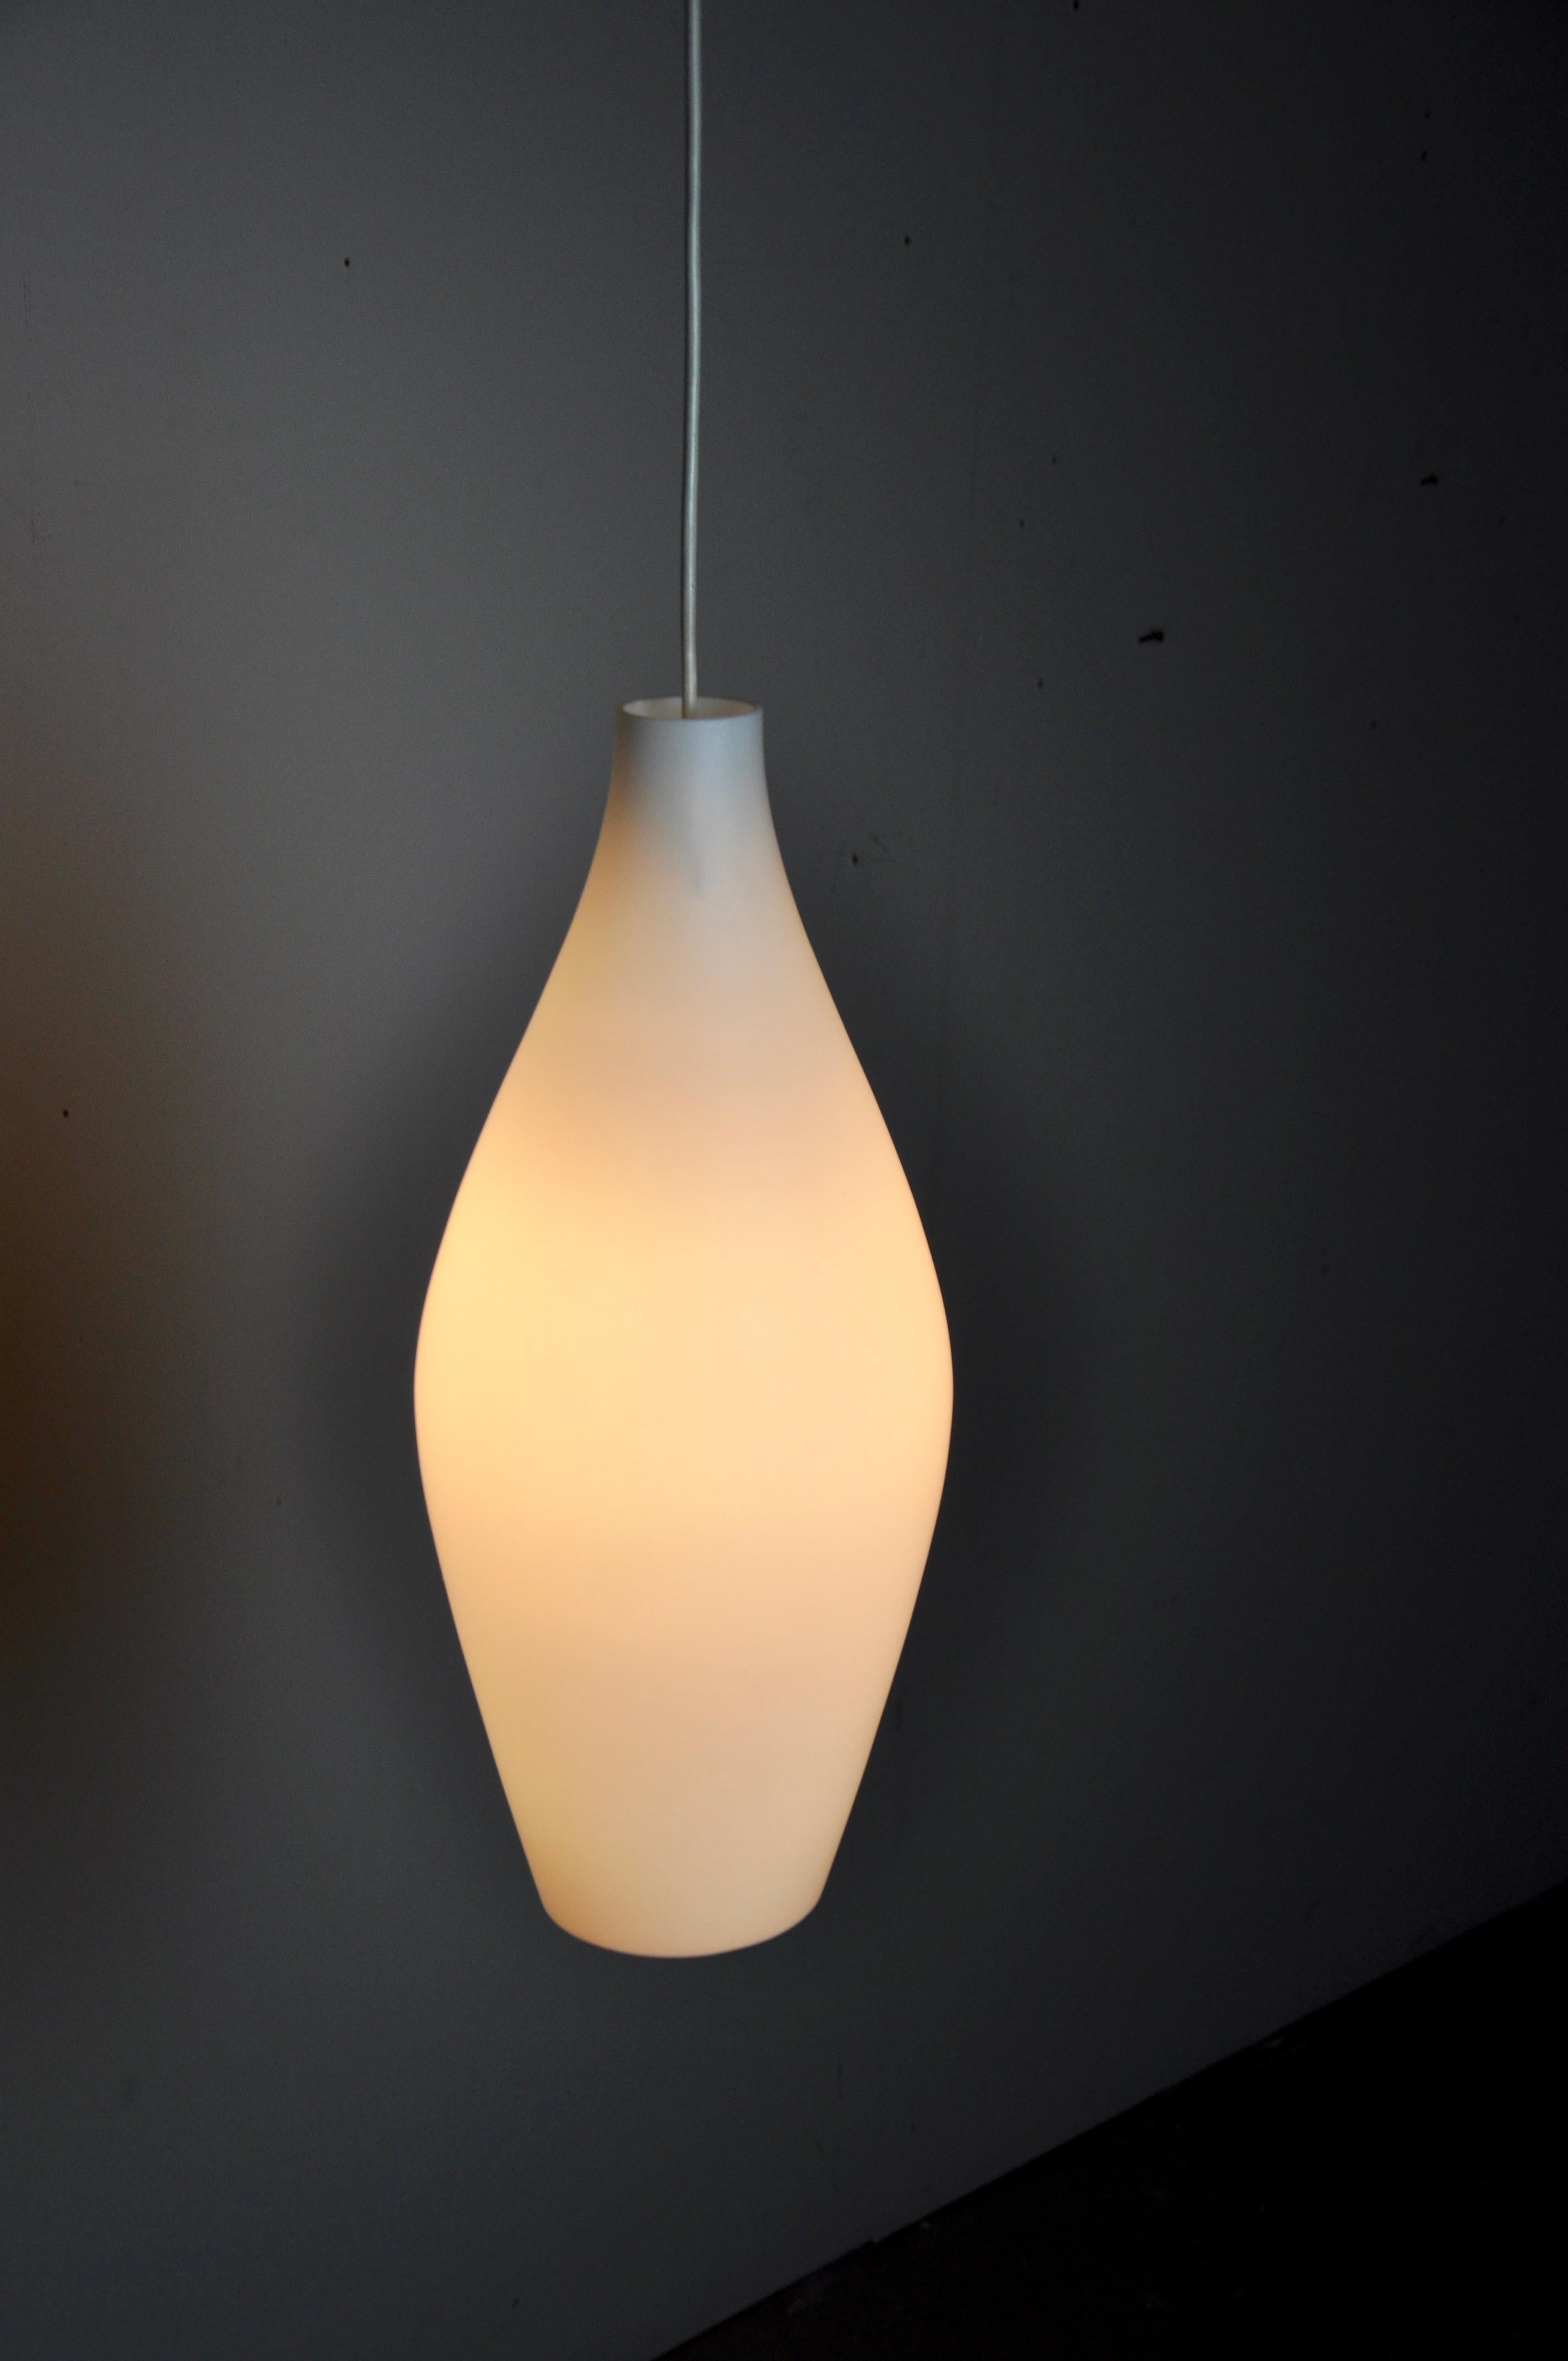 Midcentury Opaline glass pendant Lamp, Netherlands, 1950s. You have a 110cm long cable at the top of the lamp.